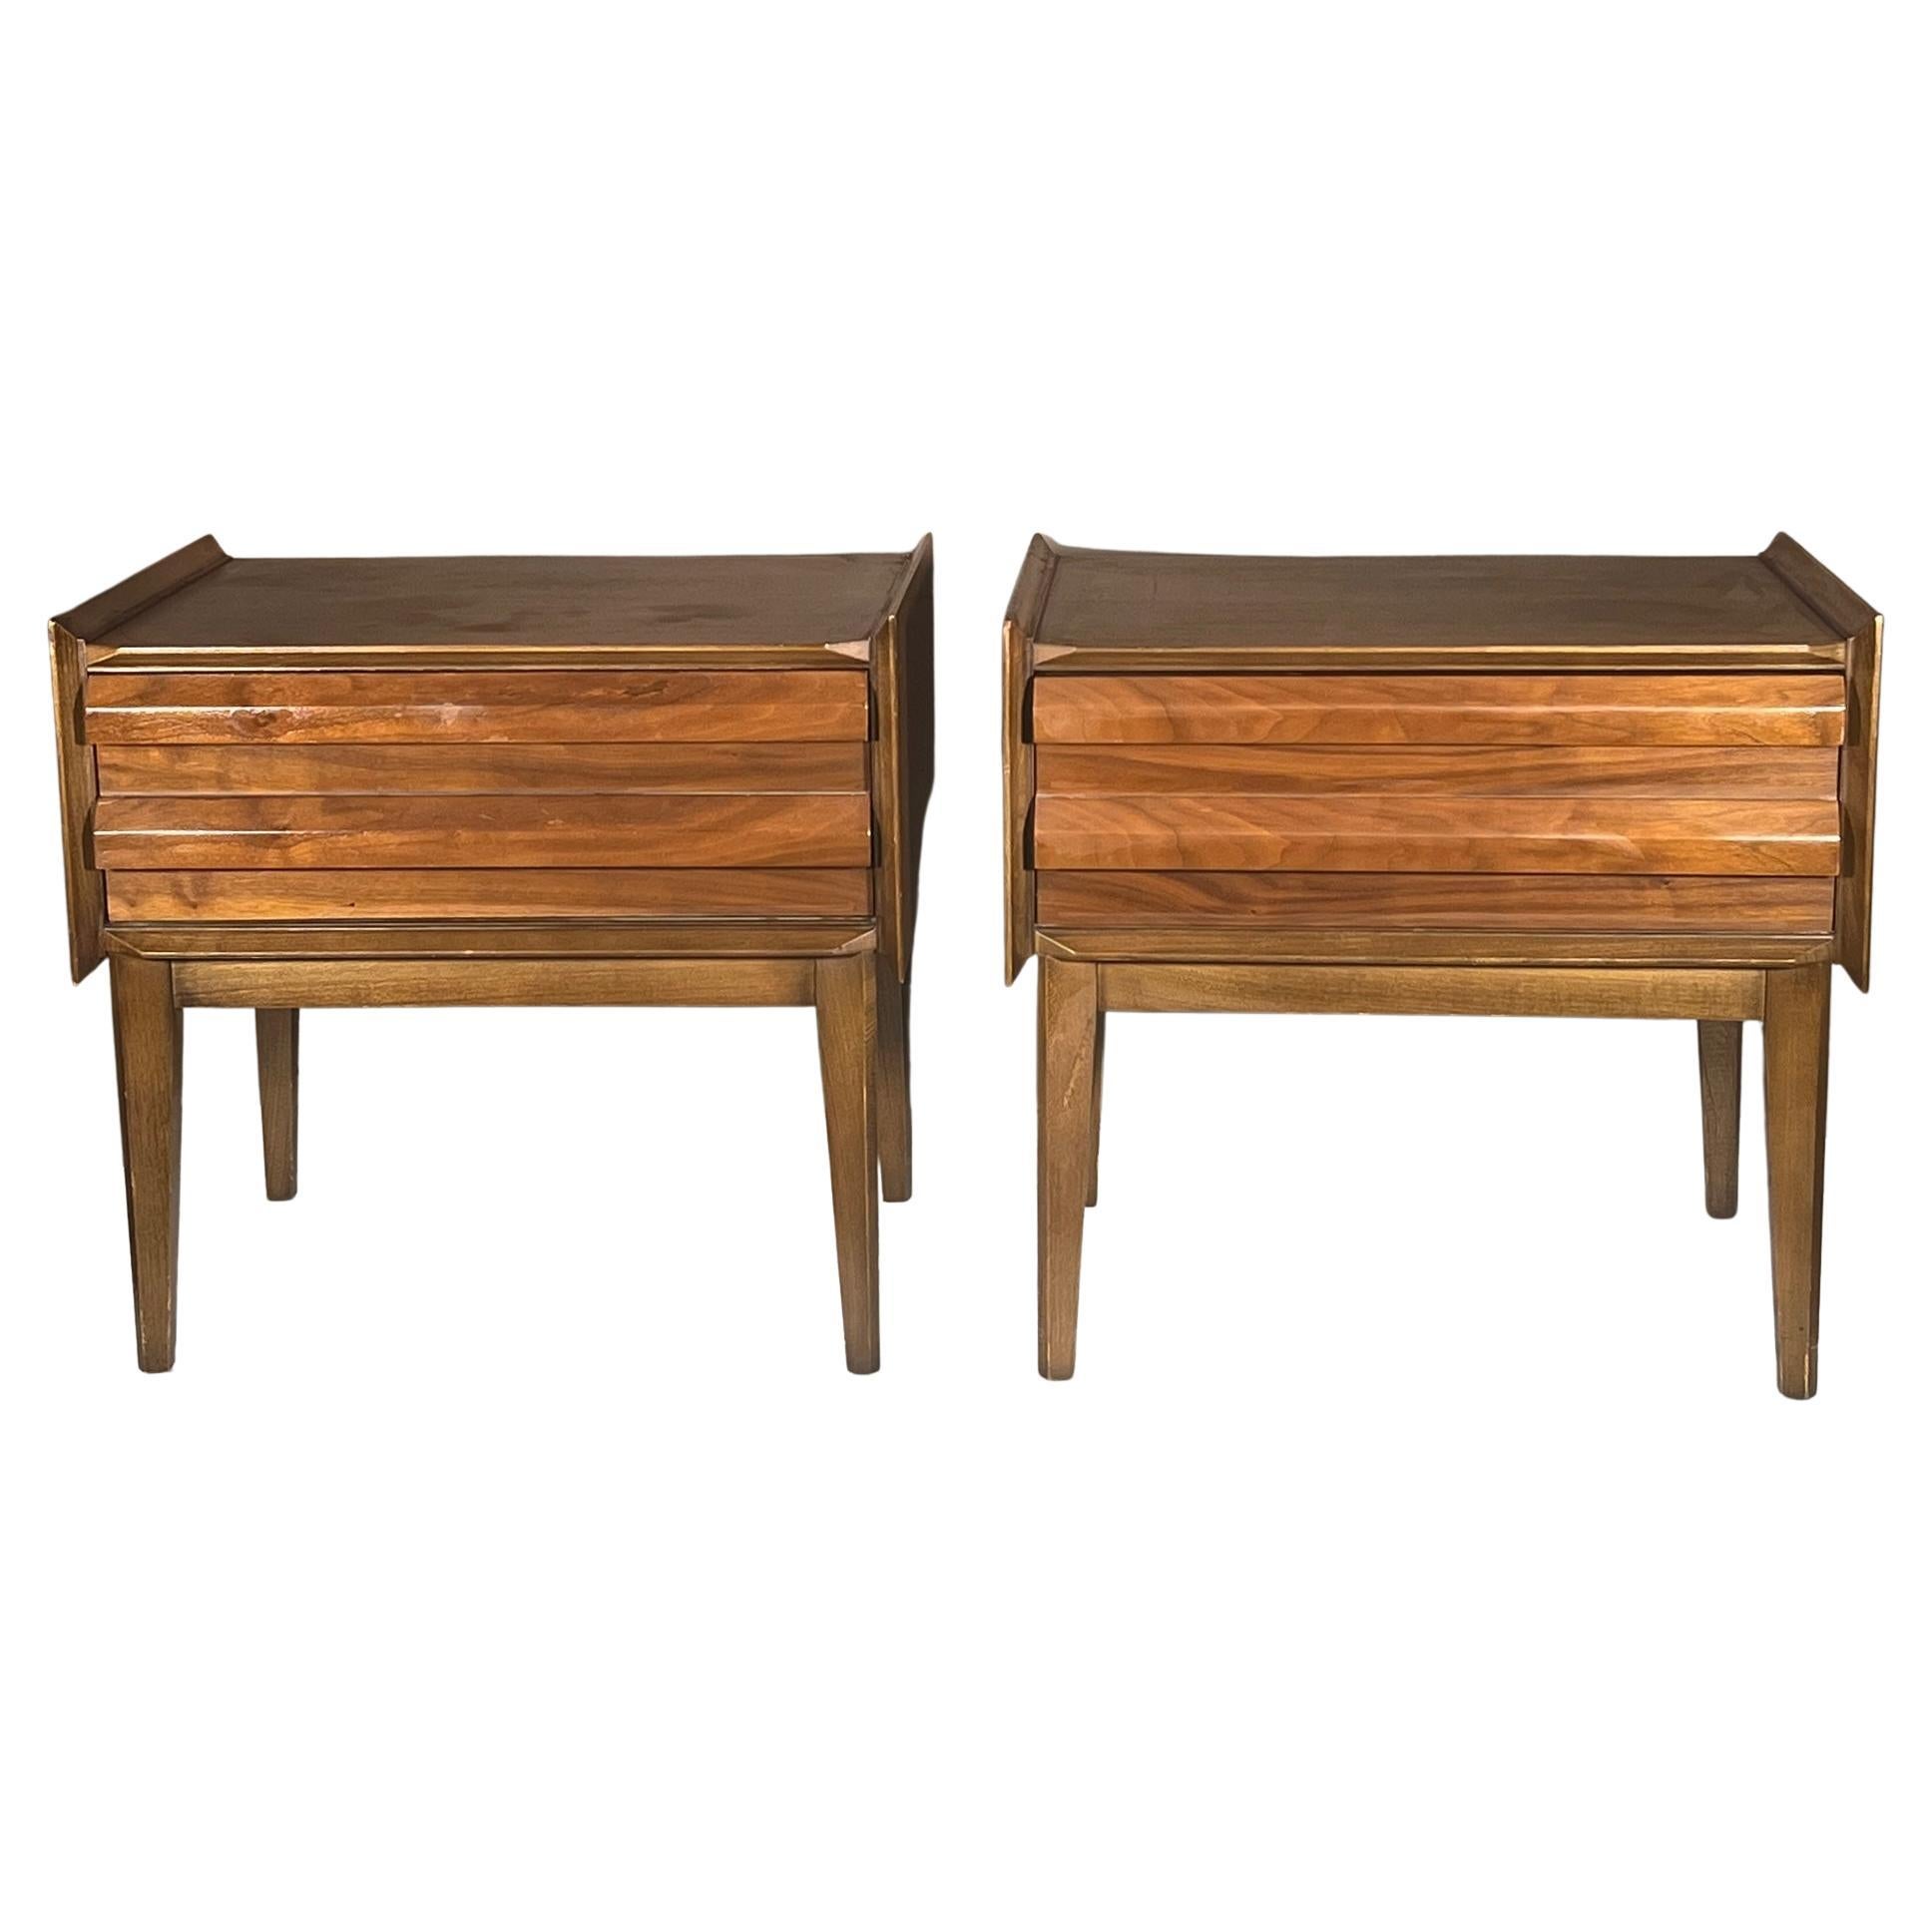 A Pair Of Sculptural Night Stands By Lane Altavista For Sale